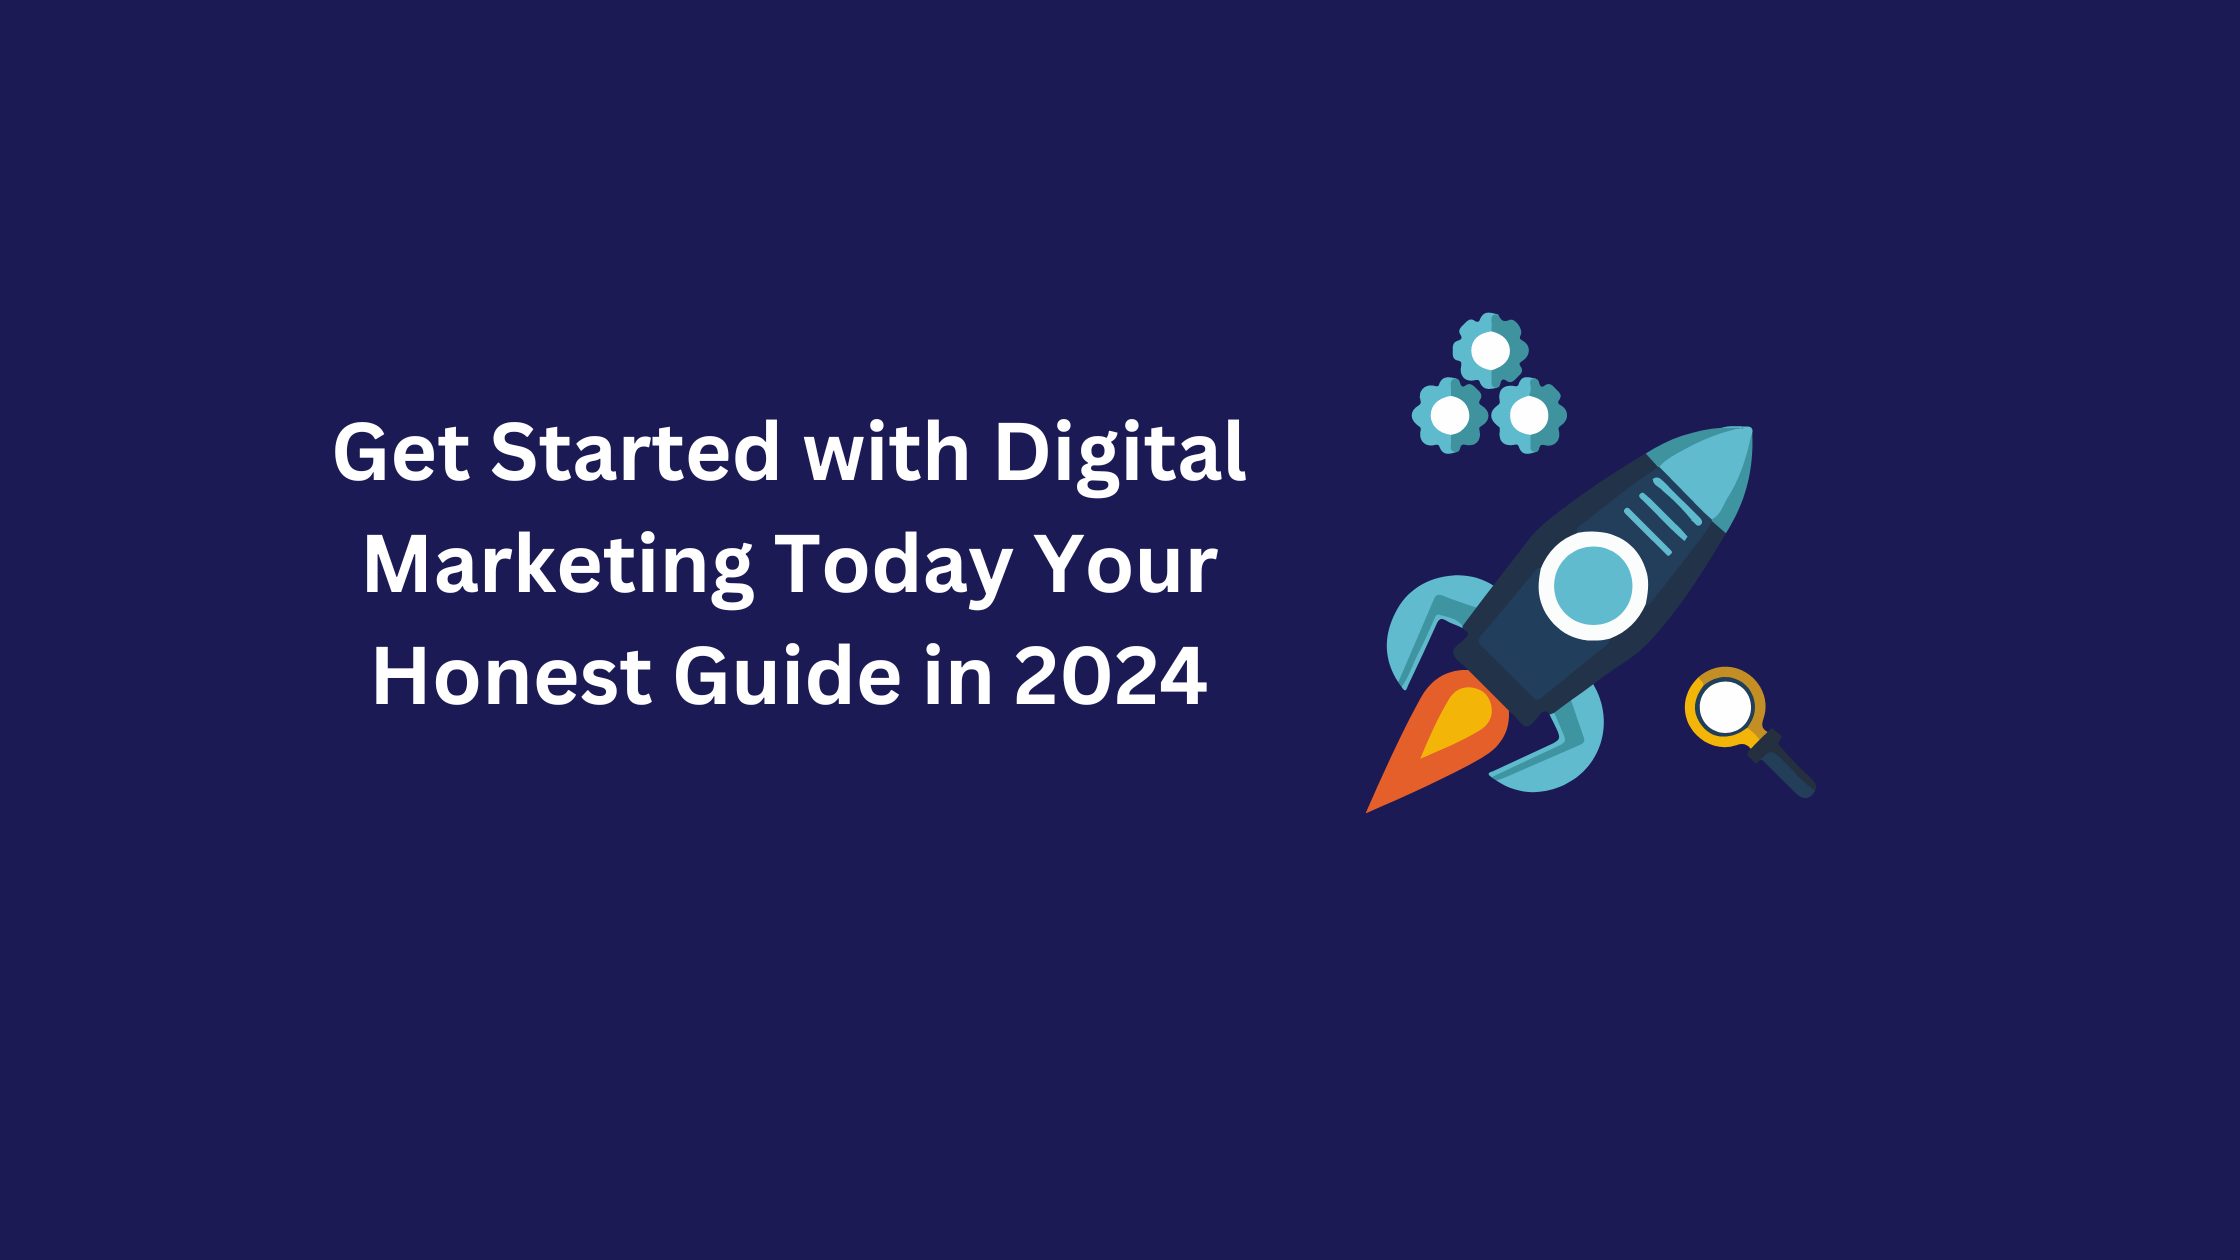 Get Started with Digital Marketing Today Your Honest guide in 2024